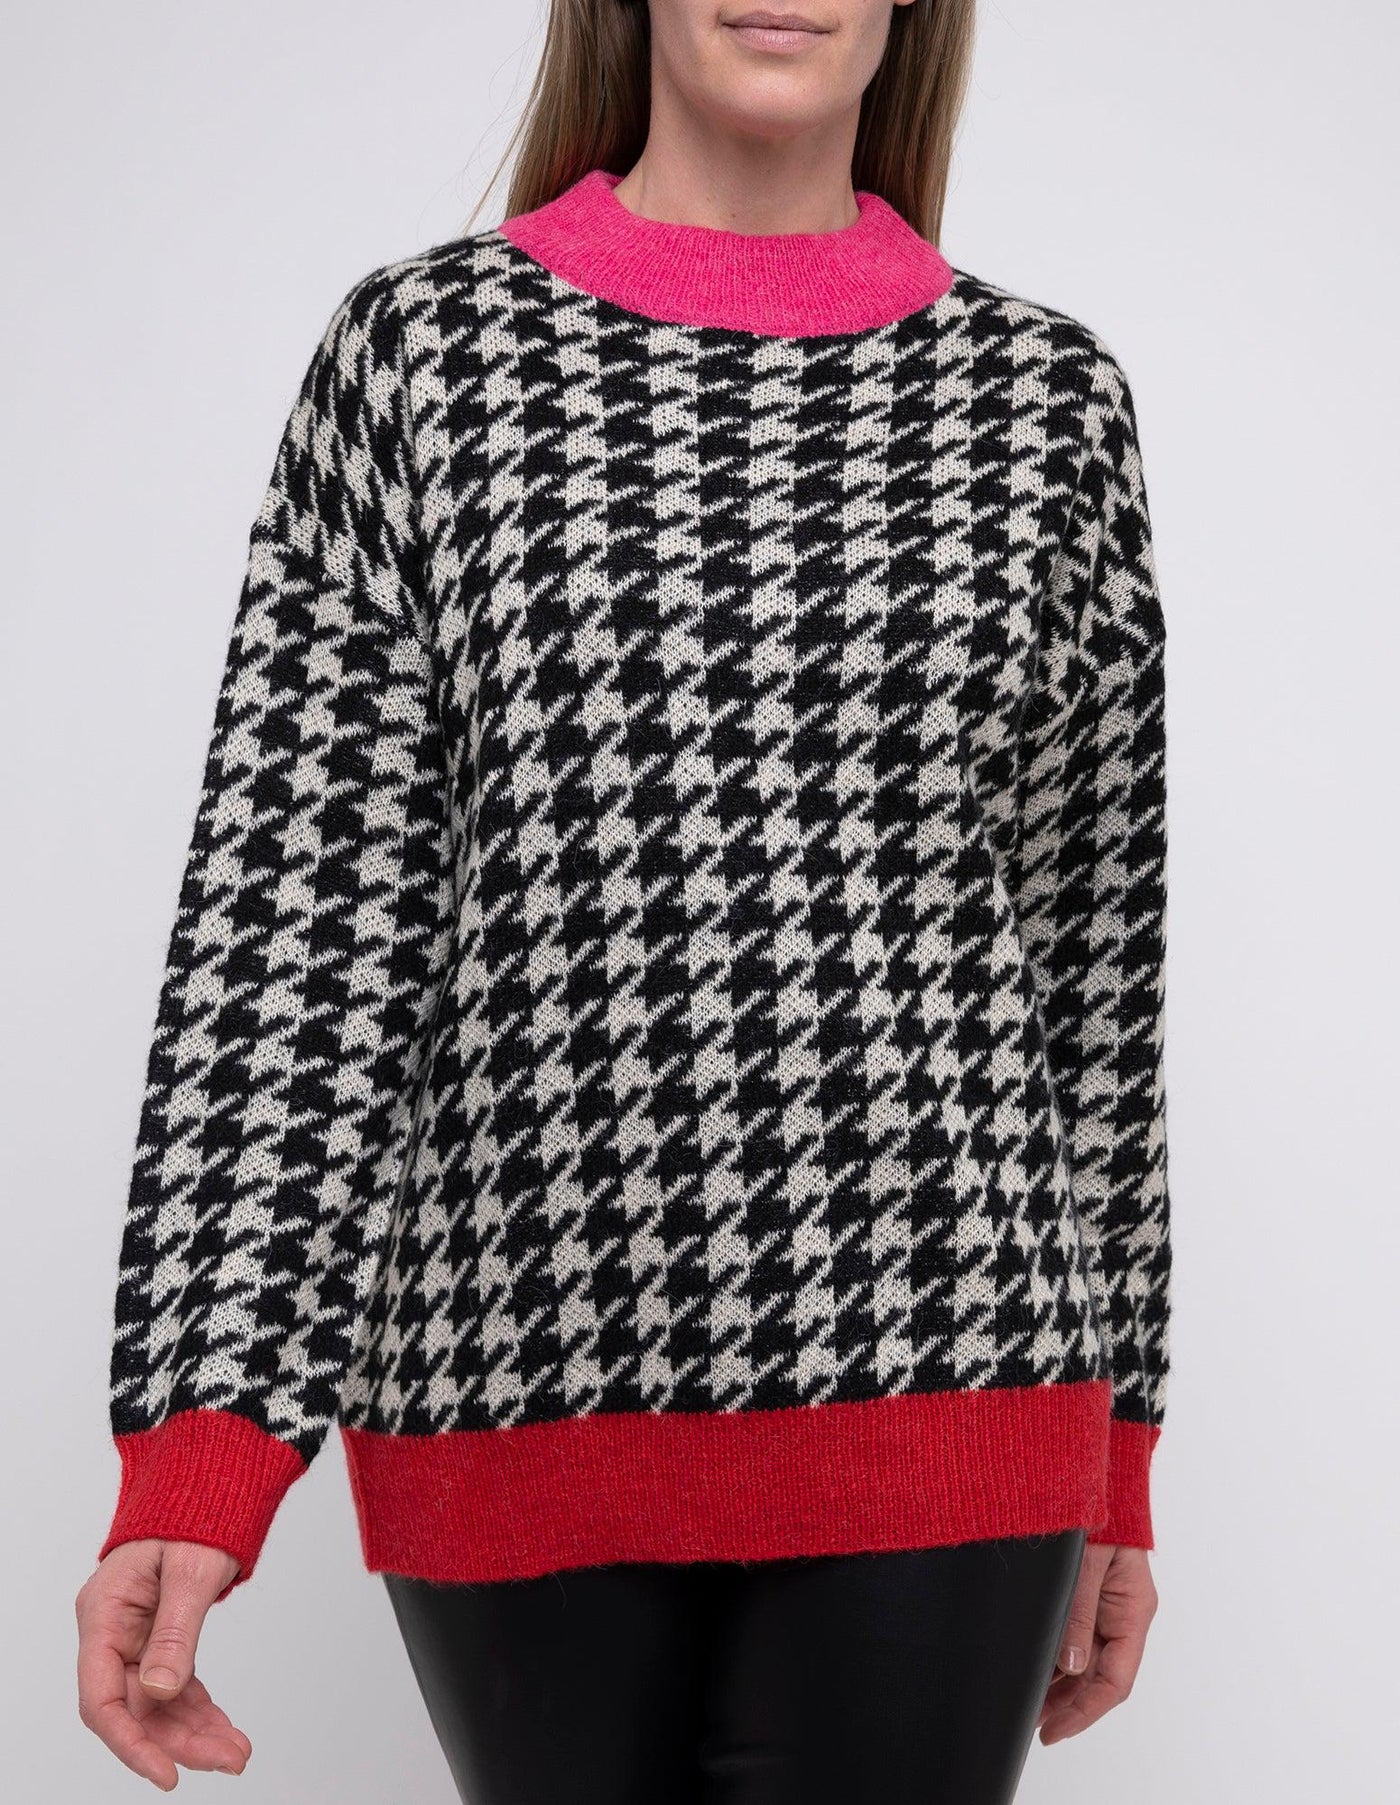 Harlequin Pullover - Black/Oatmeal-Pingpong-Lima & Co